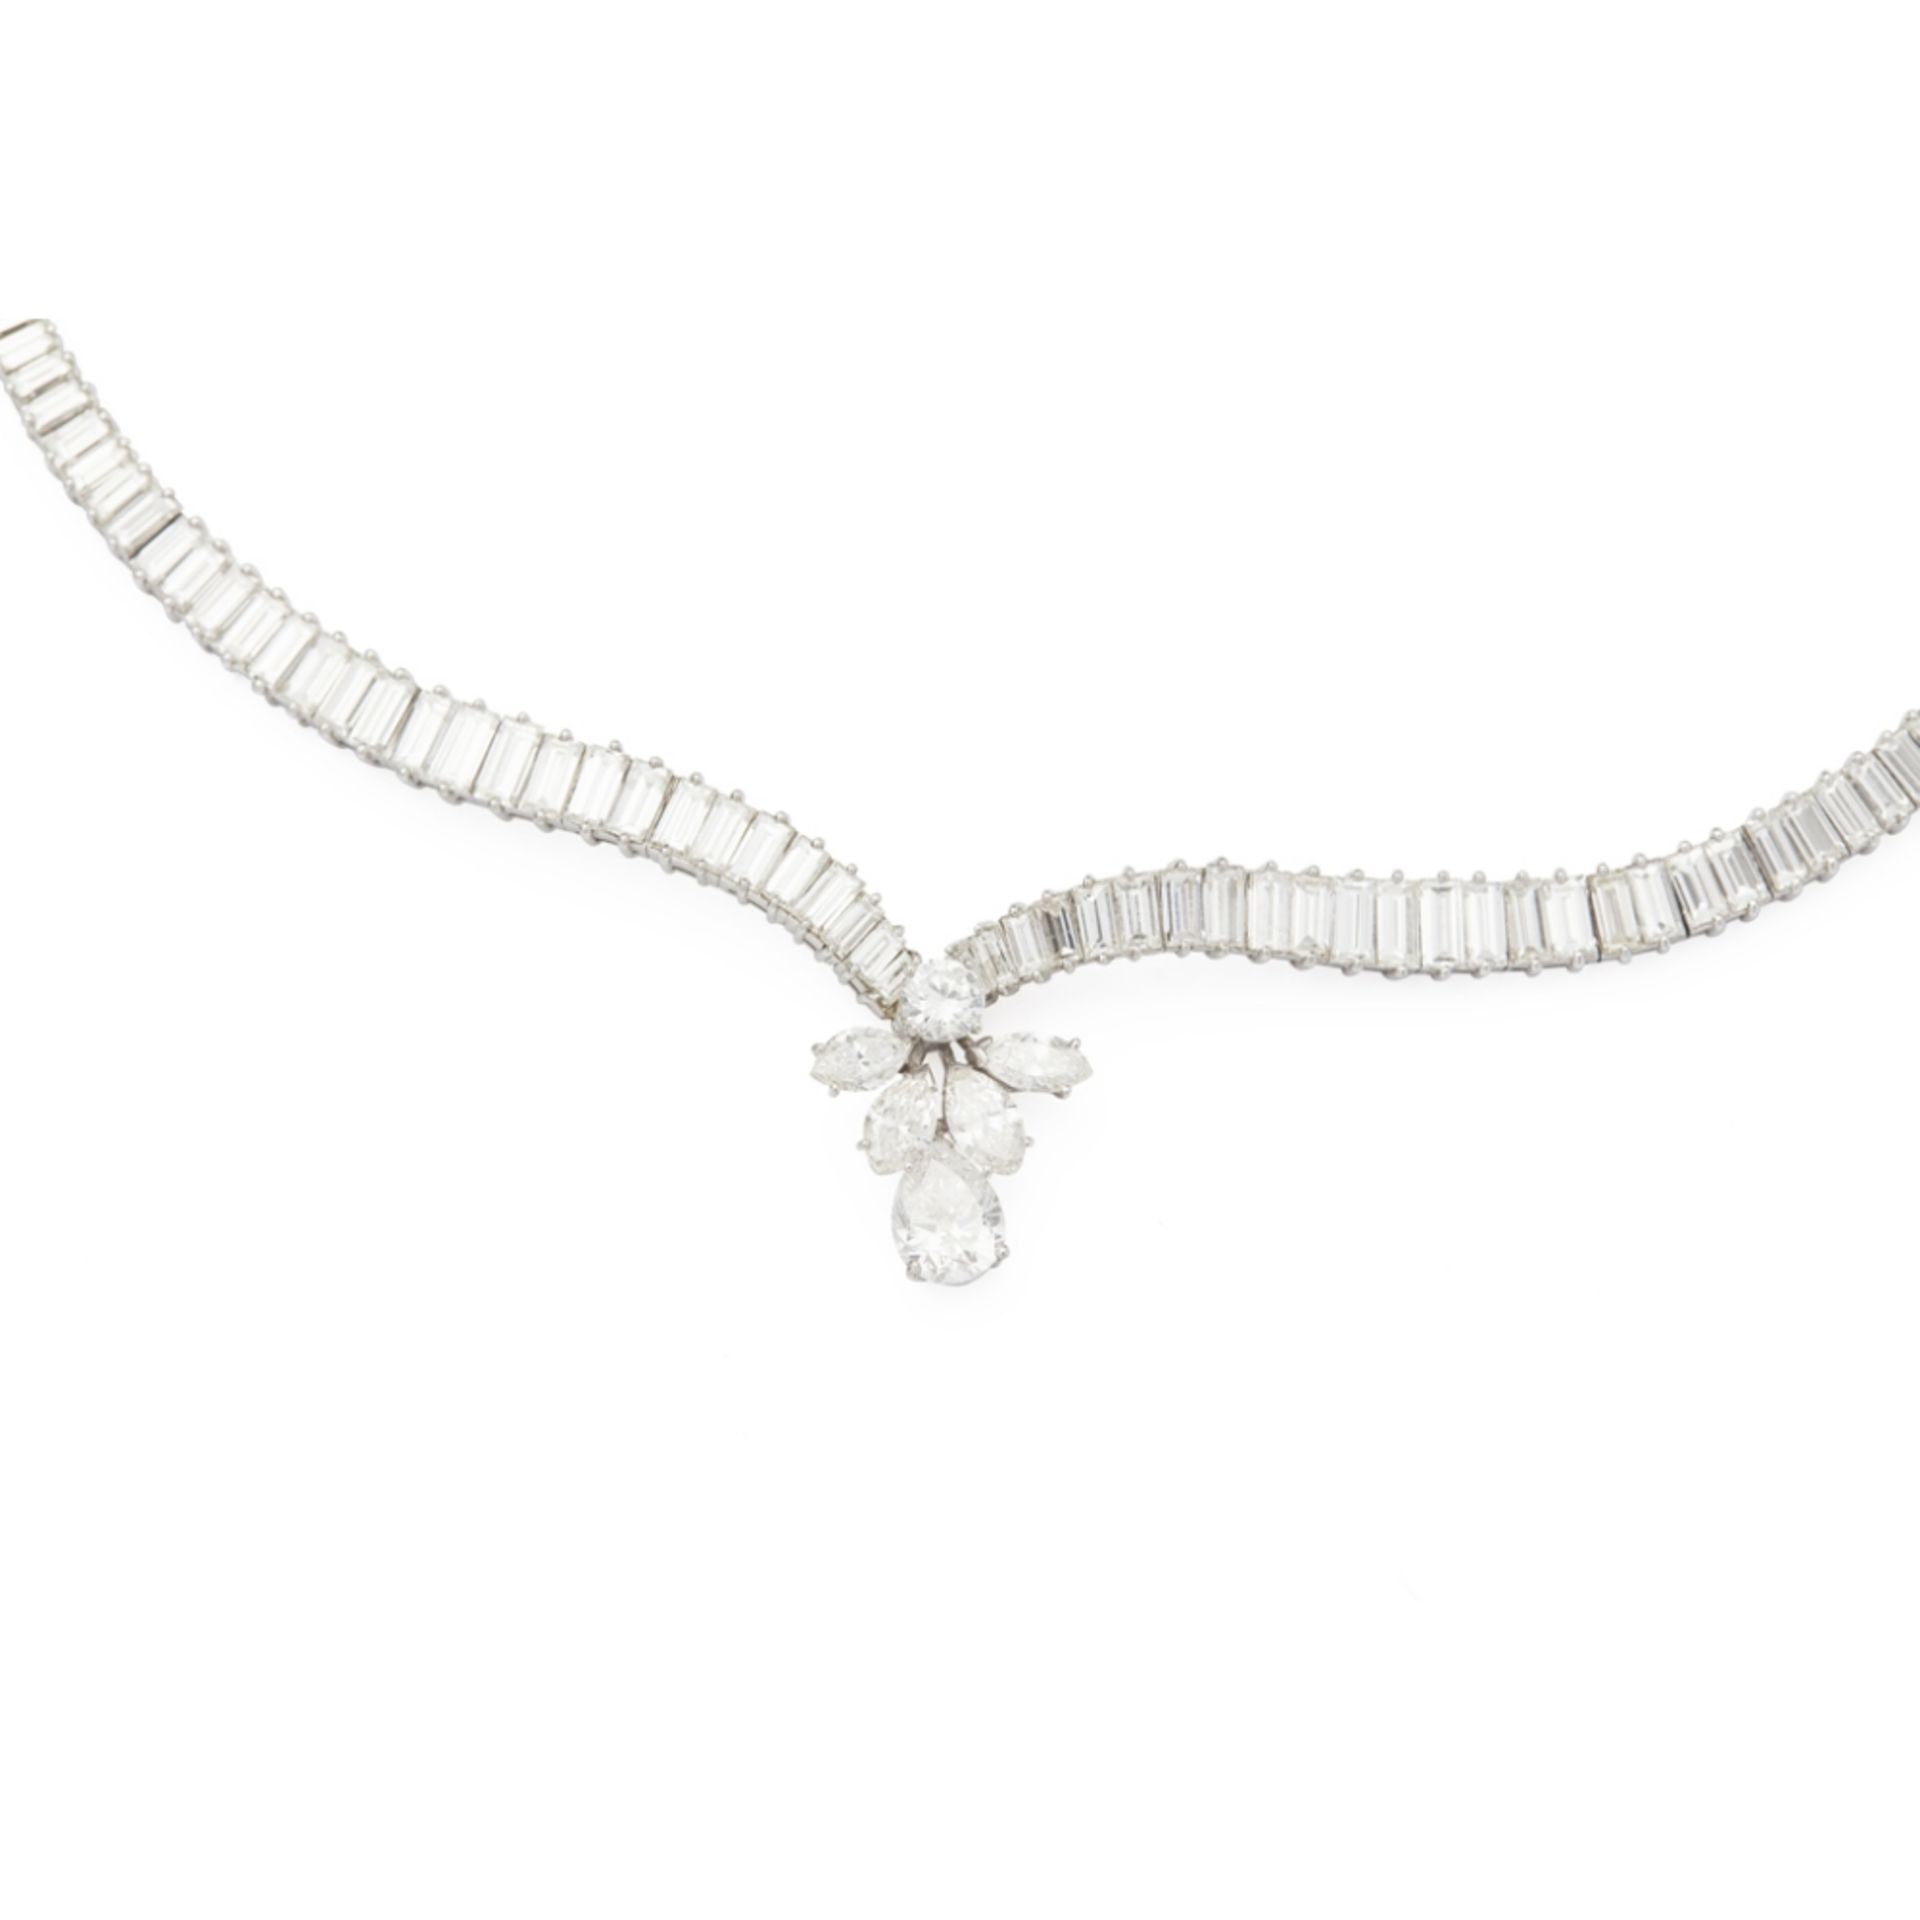 A 1940s diamond set necklacecomposed of a tapering row of round brilliant cut diamonds, leading into - Image 2 of 2